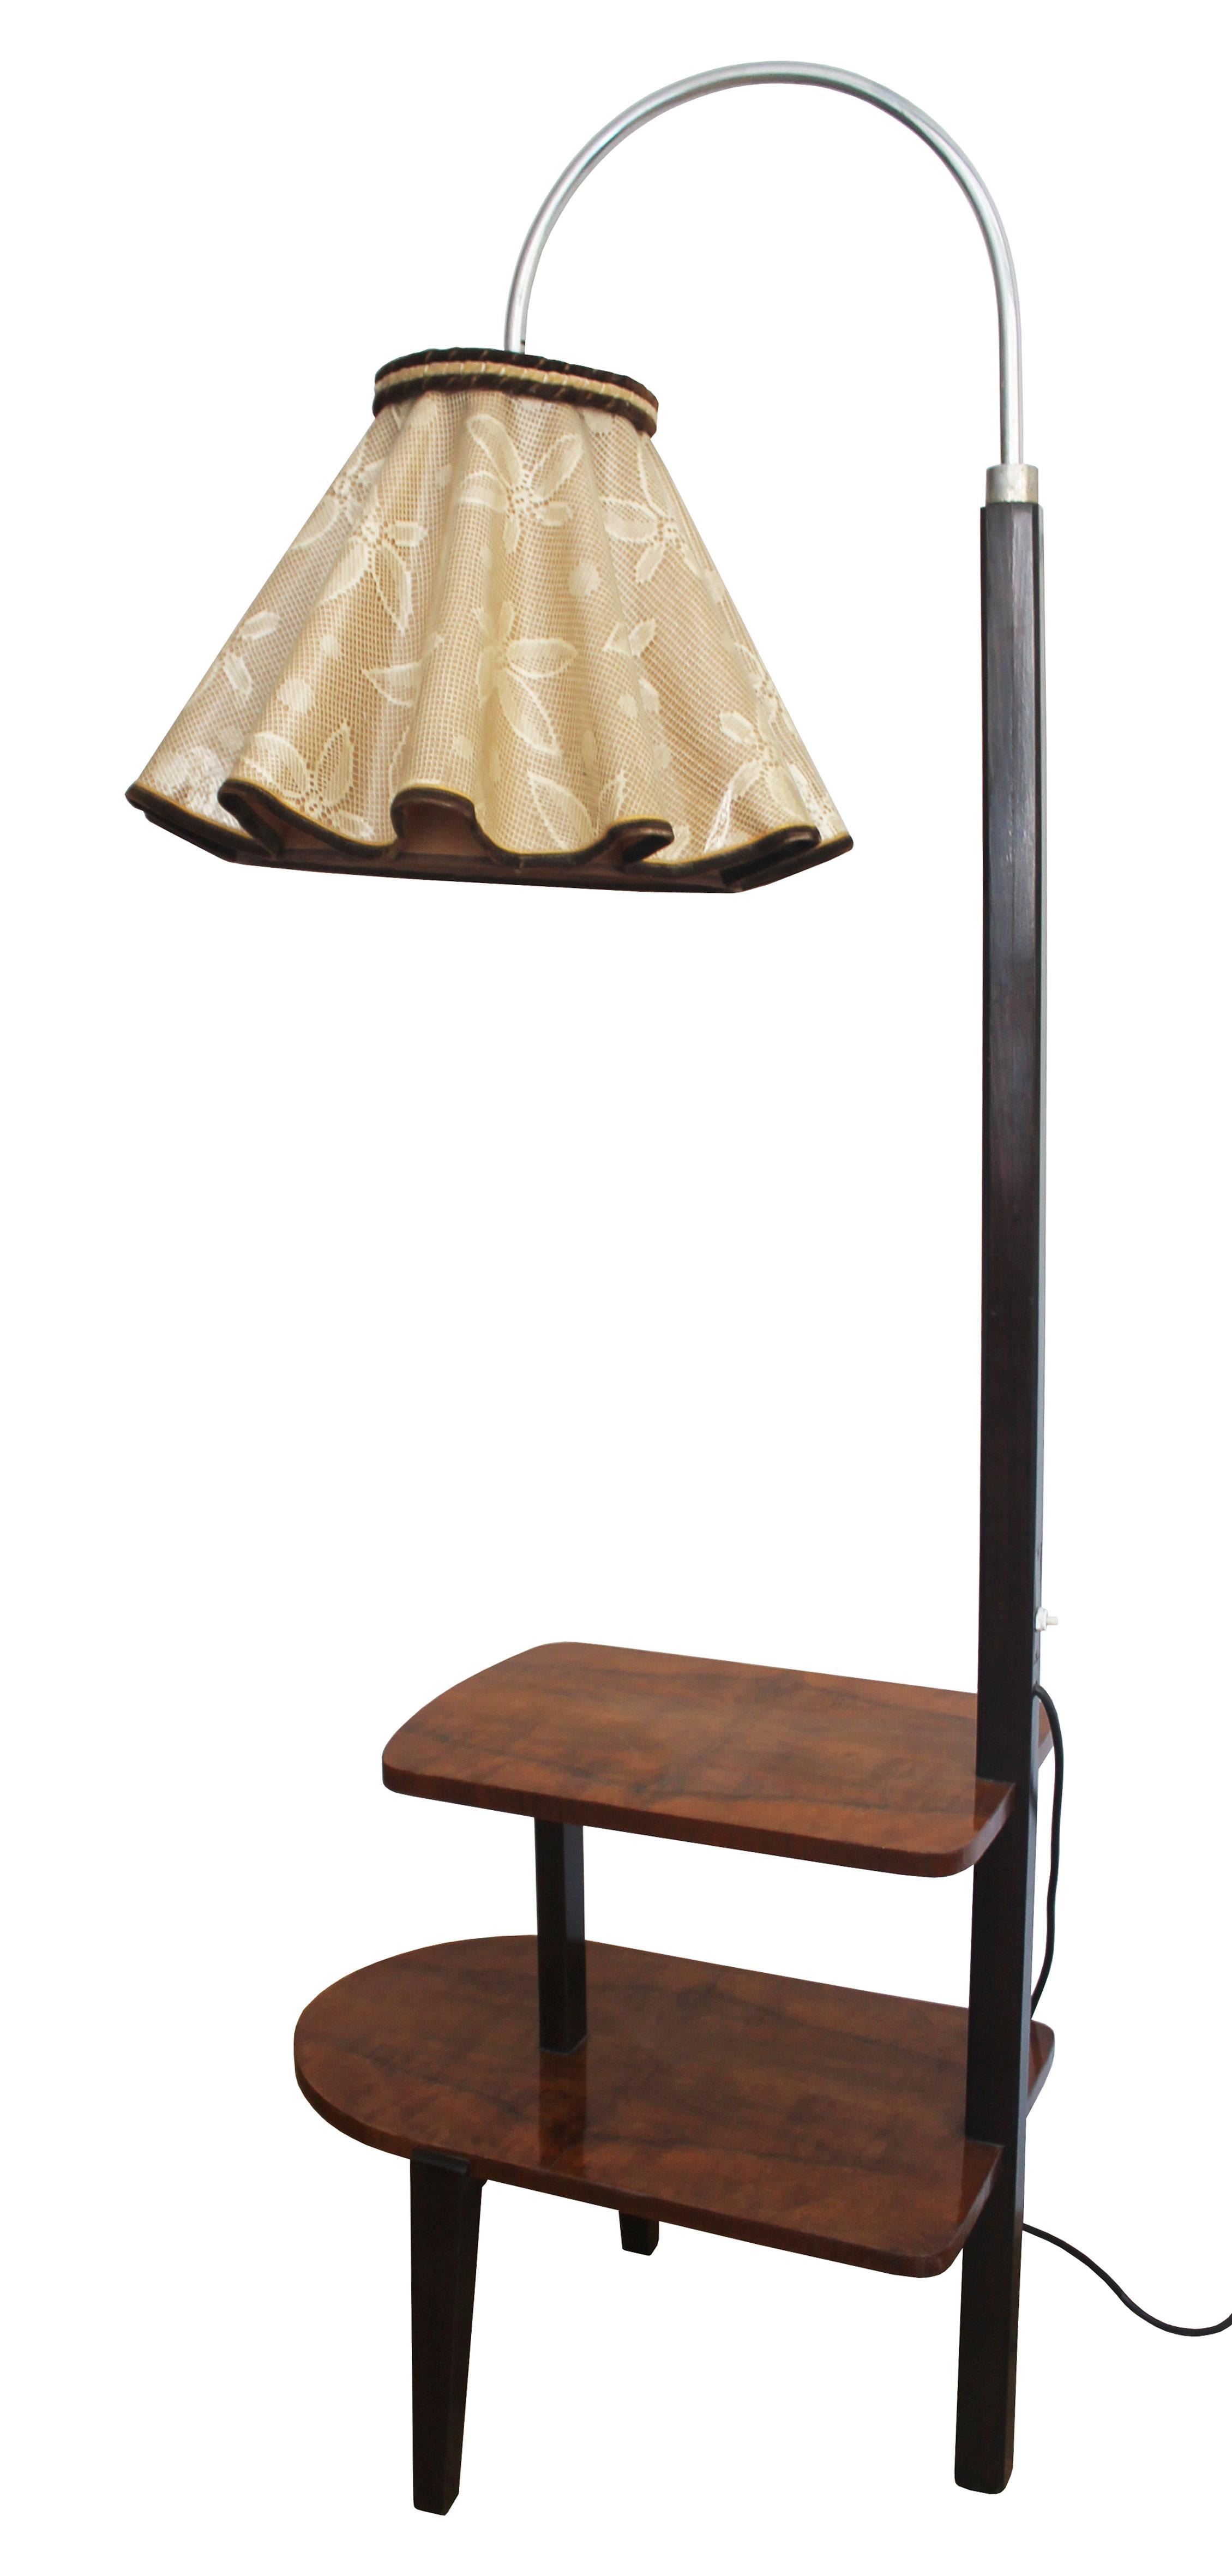 Other Art Deco Floor Lamp by Jindrich Halabala for UP Brno